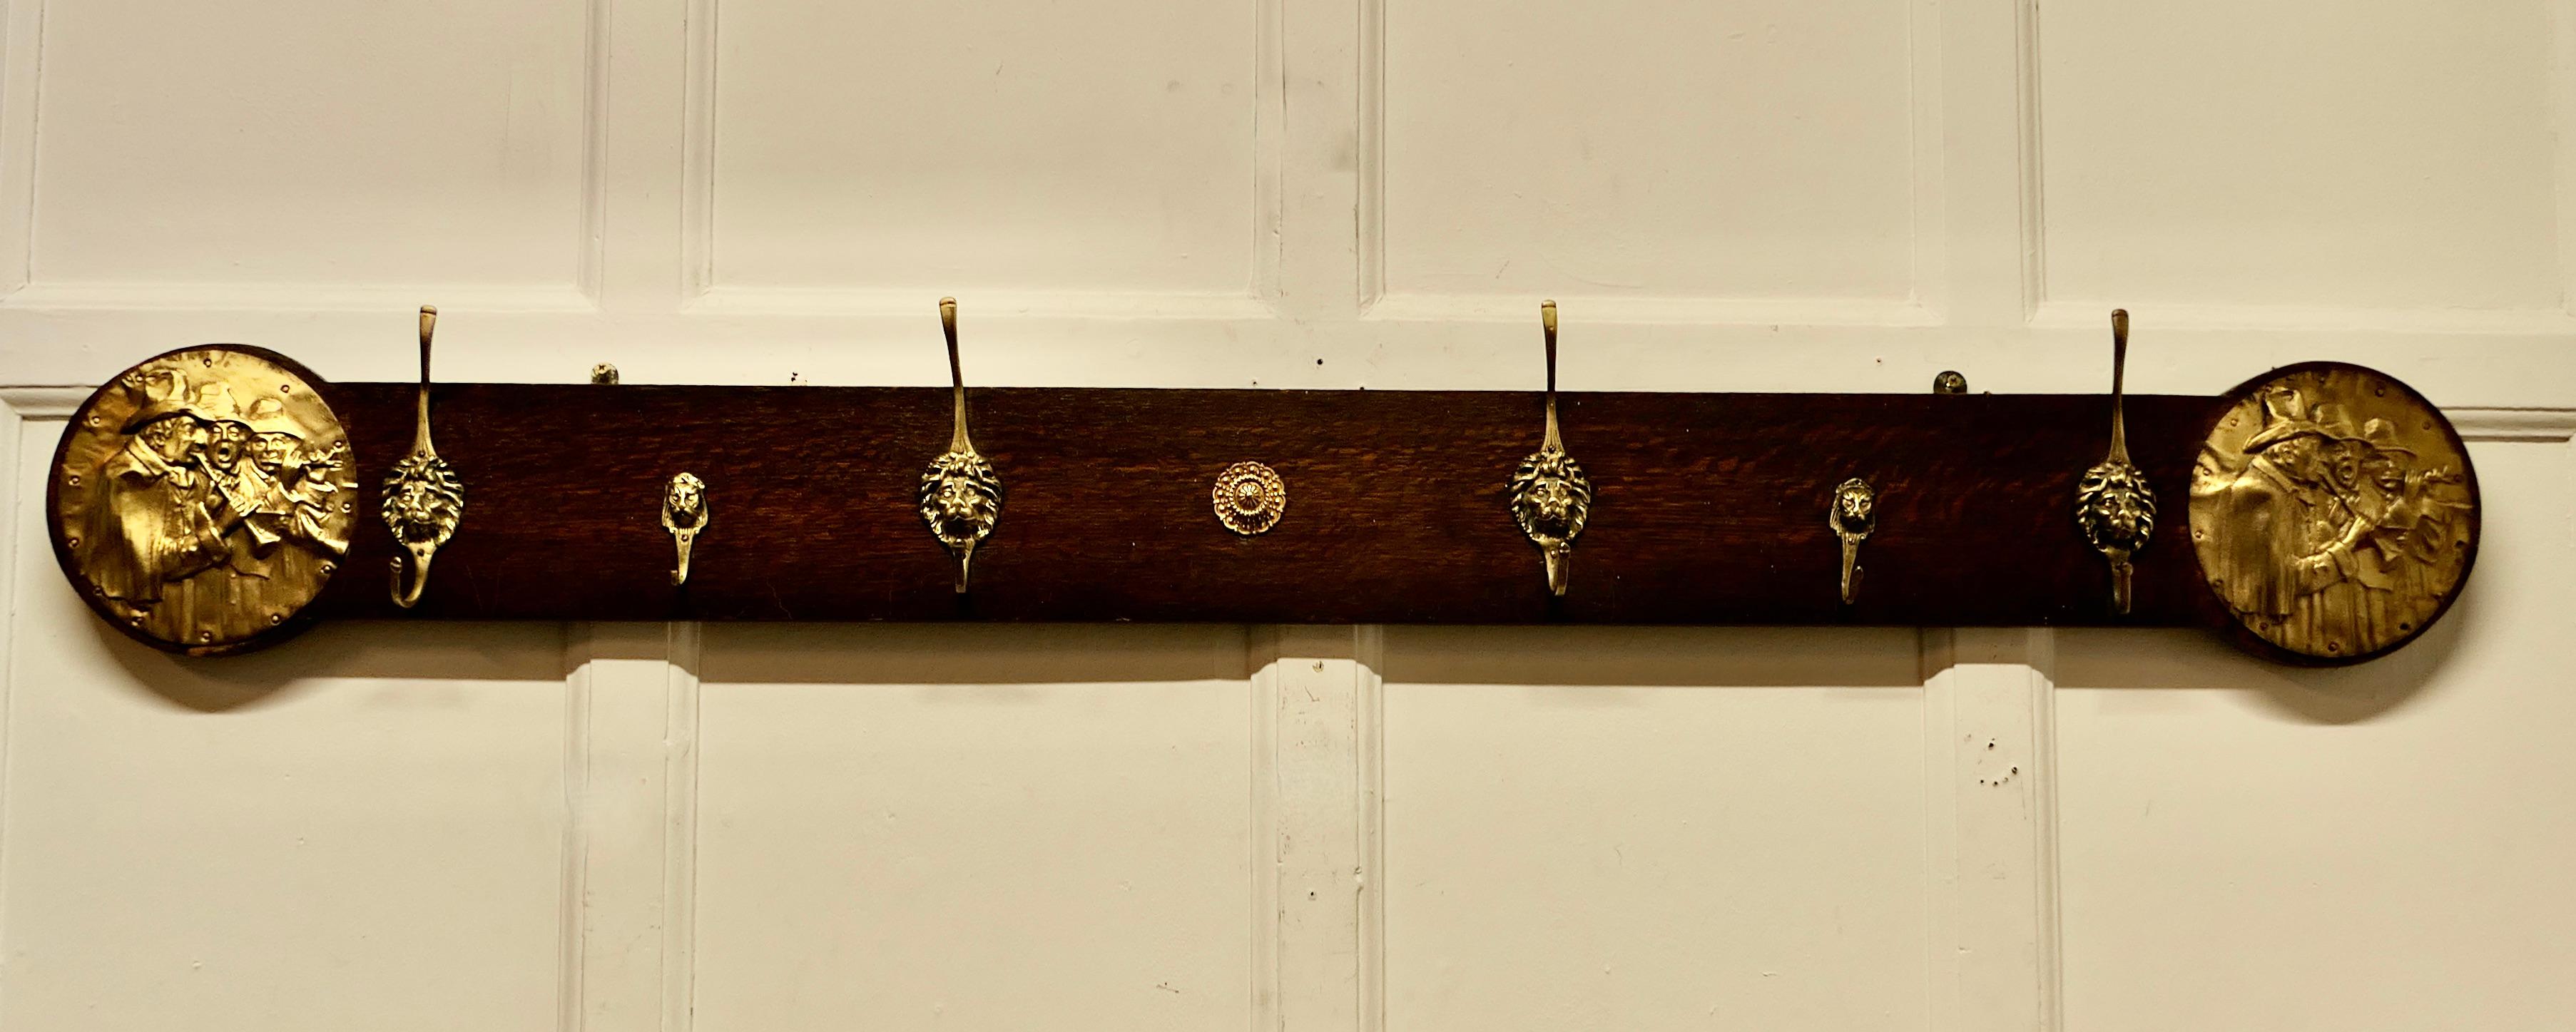 Long Oak Pub Coat Rack, with Lion’s Mask Hooks

A long piece of solid oak with both large and small brass lions mask coat pegs and round end plaques with some very jolly musicians

The Coat rail is 61” long and 9” high and 3” deep on the wall
SW235